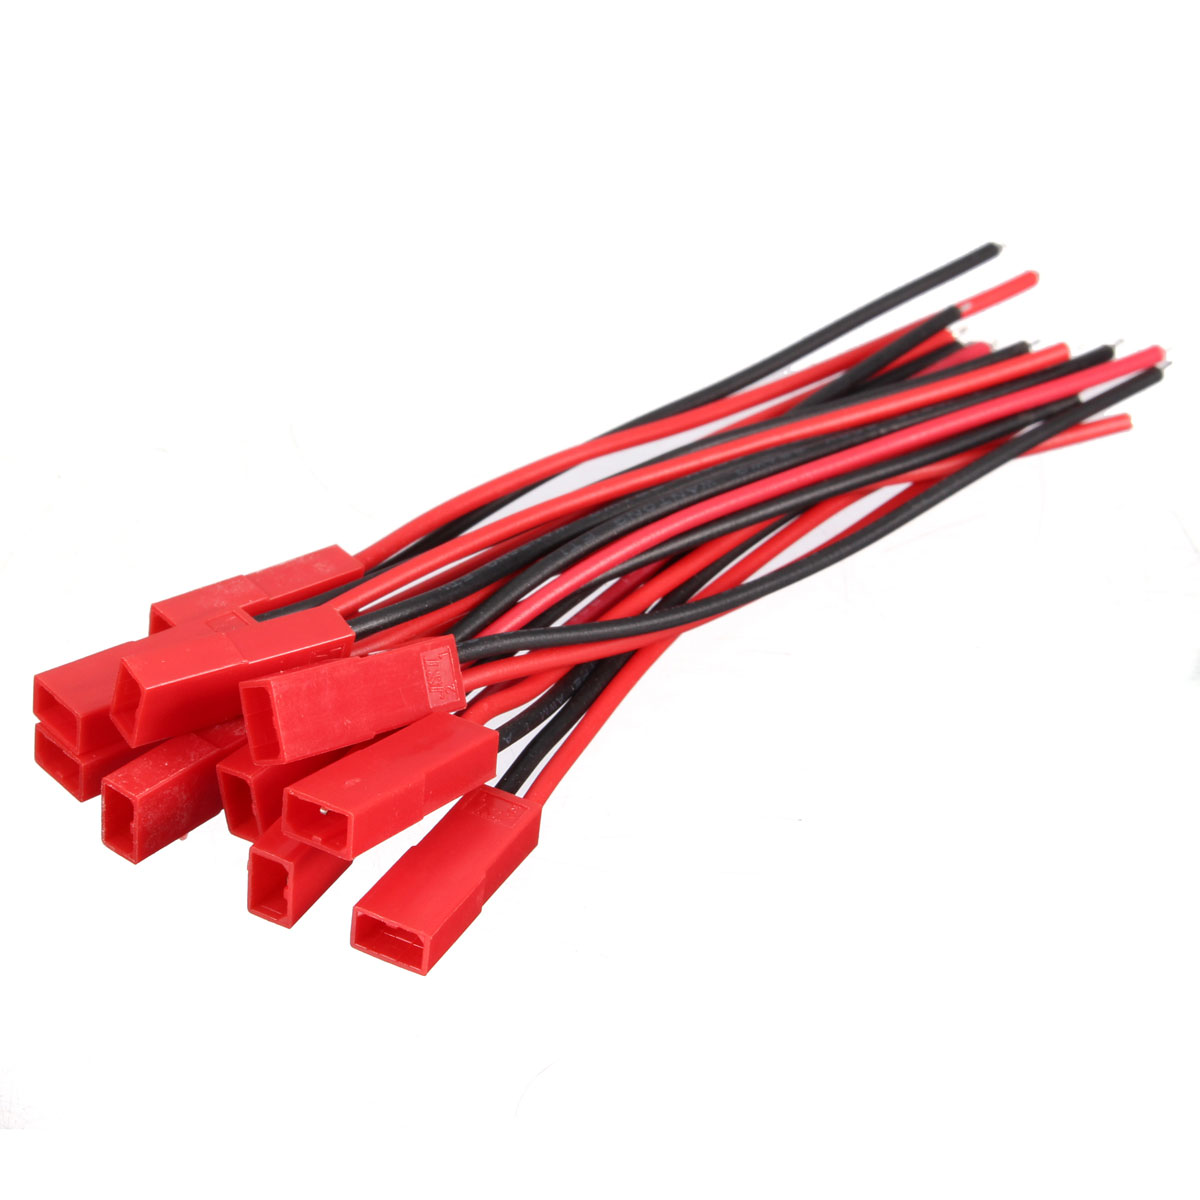 Excellwayreg-10-Pairs-2-Pins-JST-Male--Female-Connectors-Plug-Cable-Wire-Line-110mm-Red-1268119-1